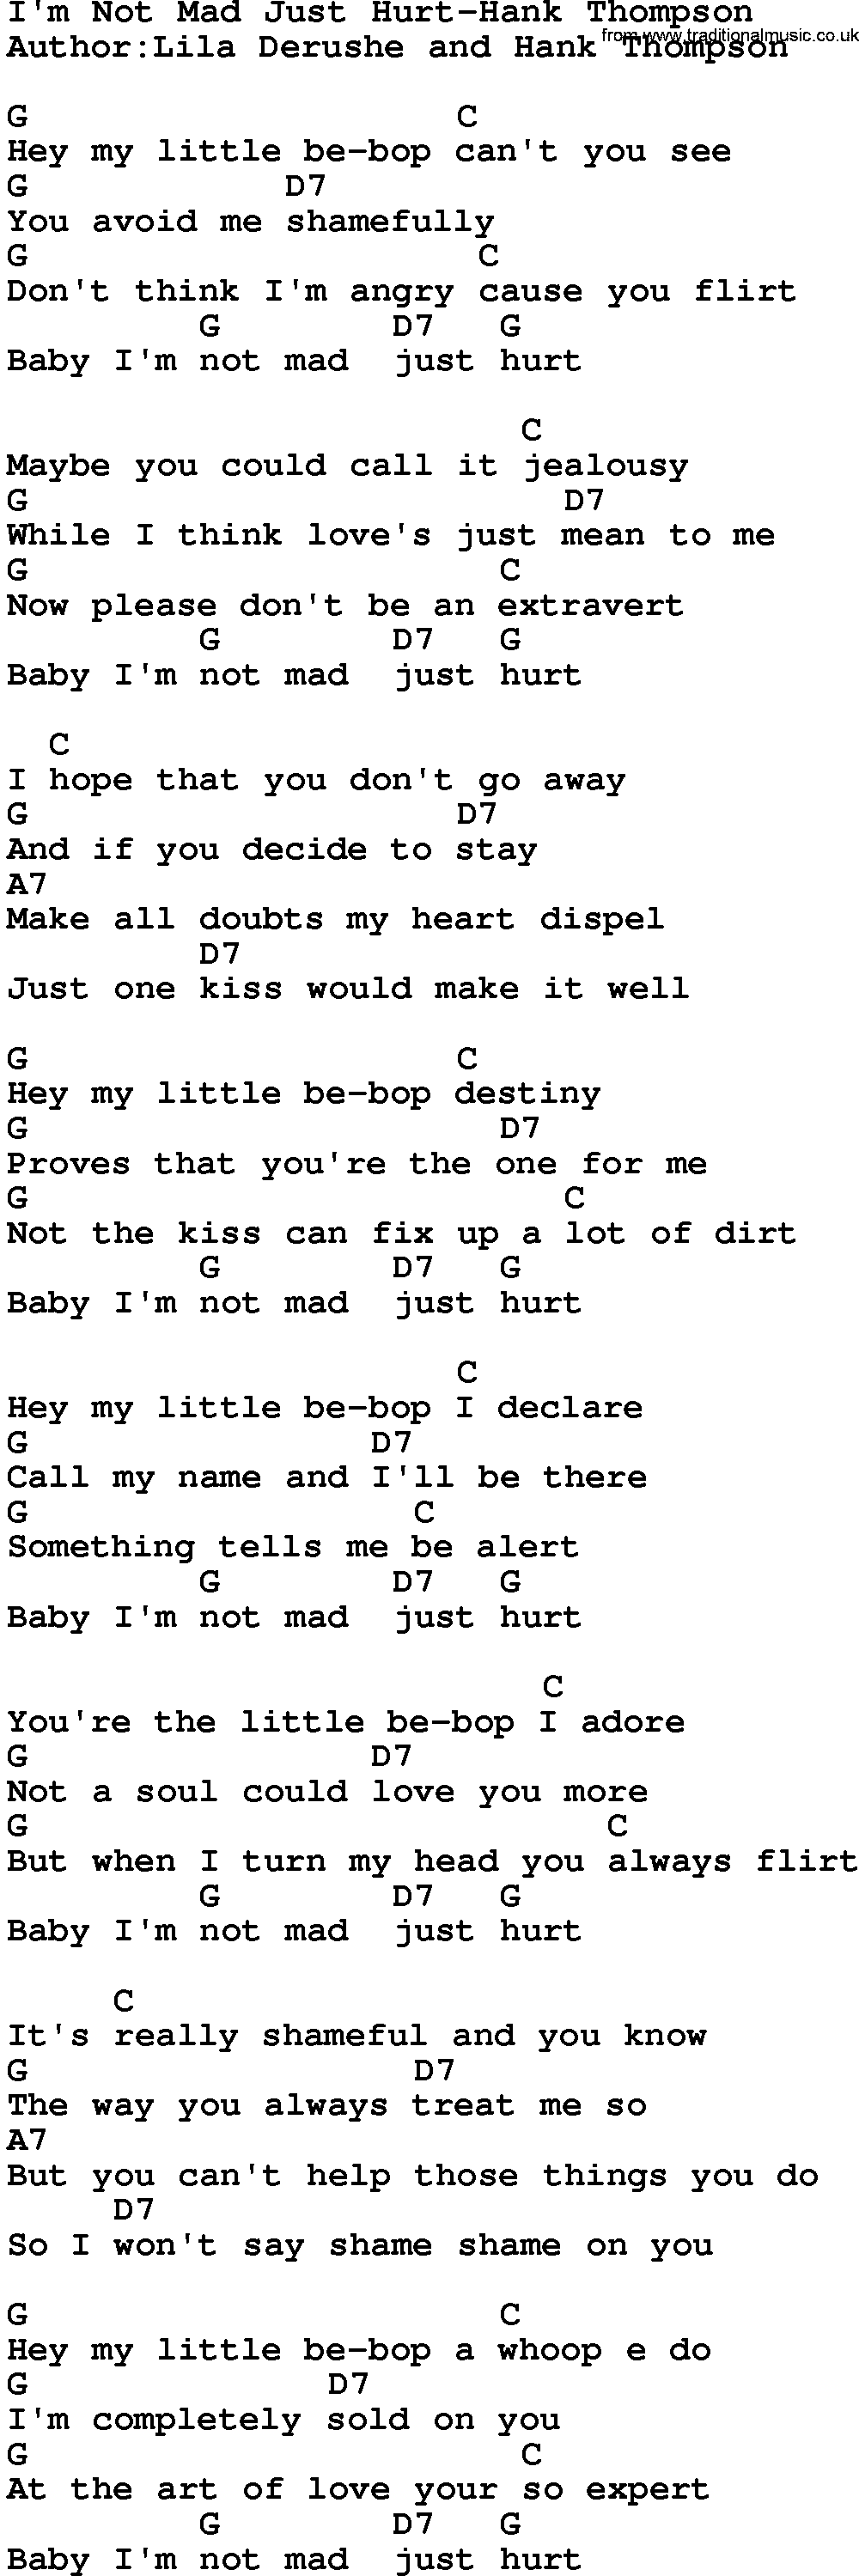 Country music song: I'm Not Mad Just Hurt-Hank Thompson lyrics and chords